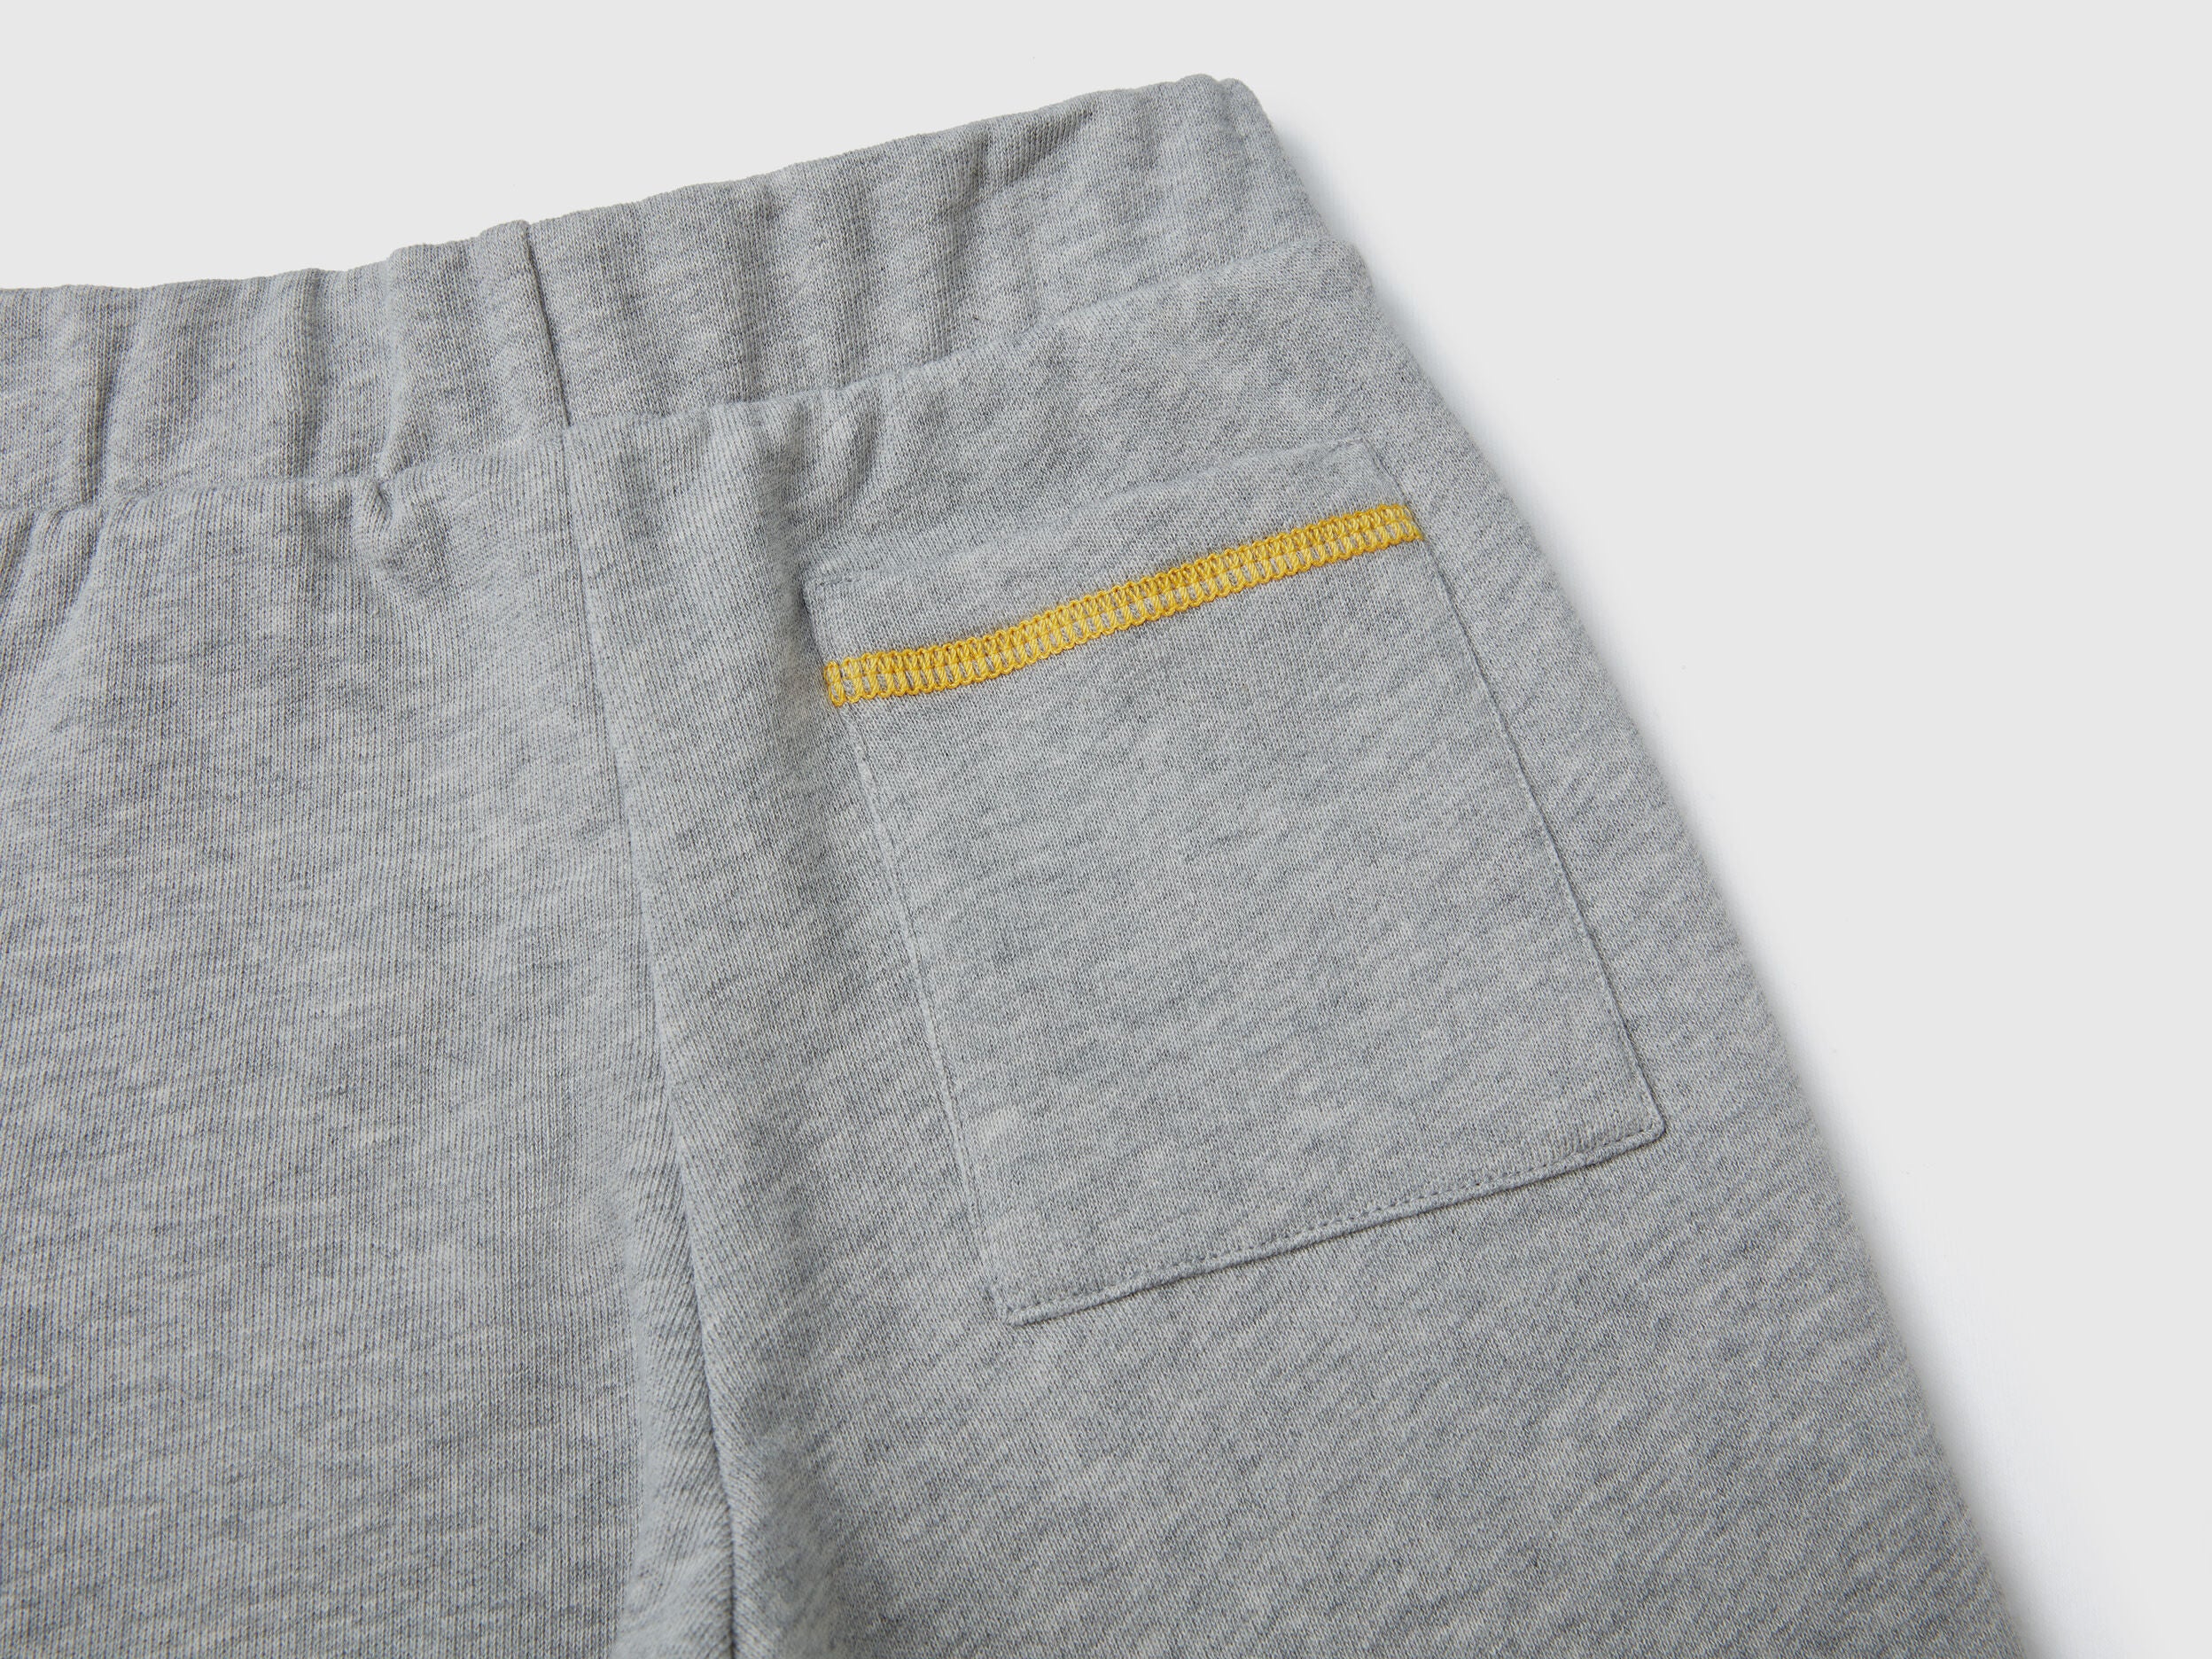 Sweat Tracksuit In 100% Cotton